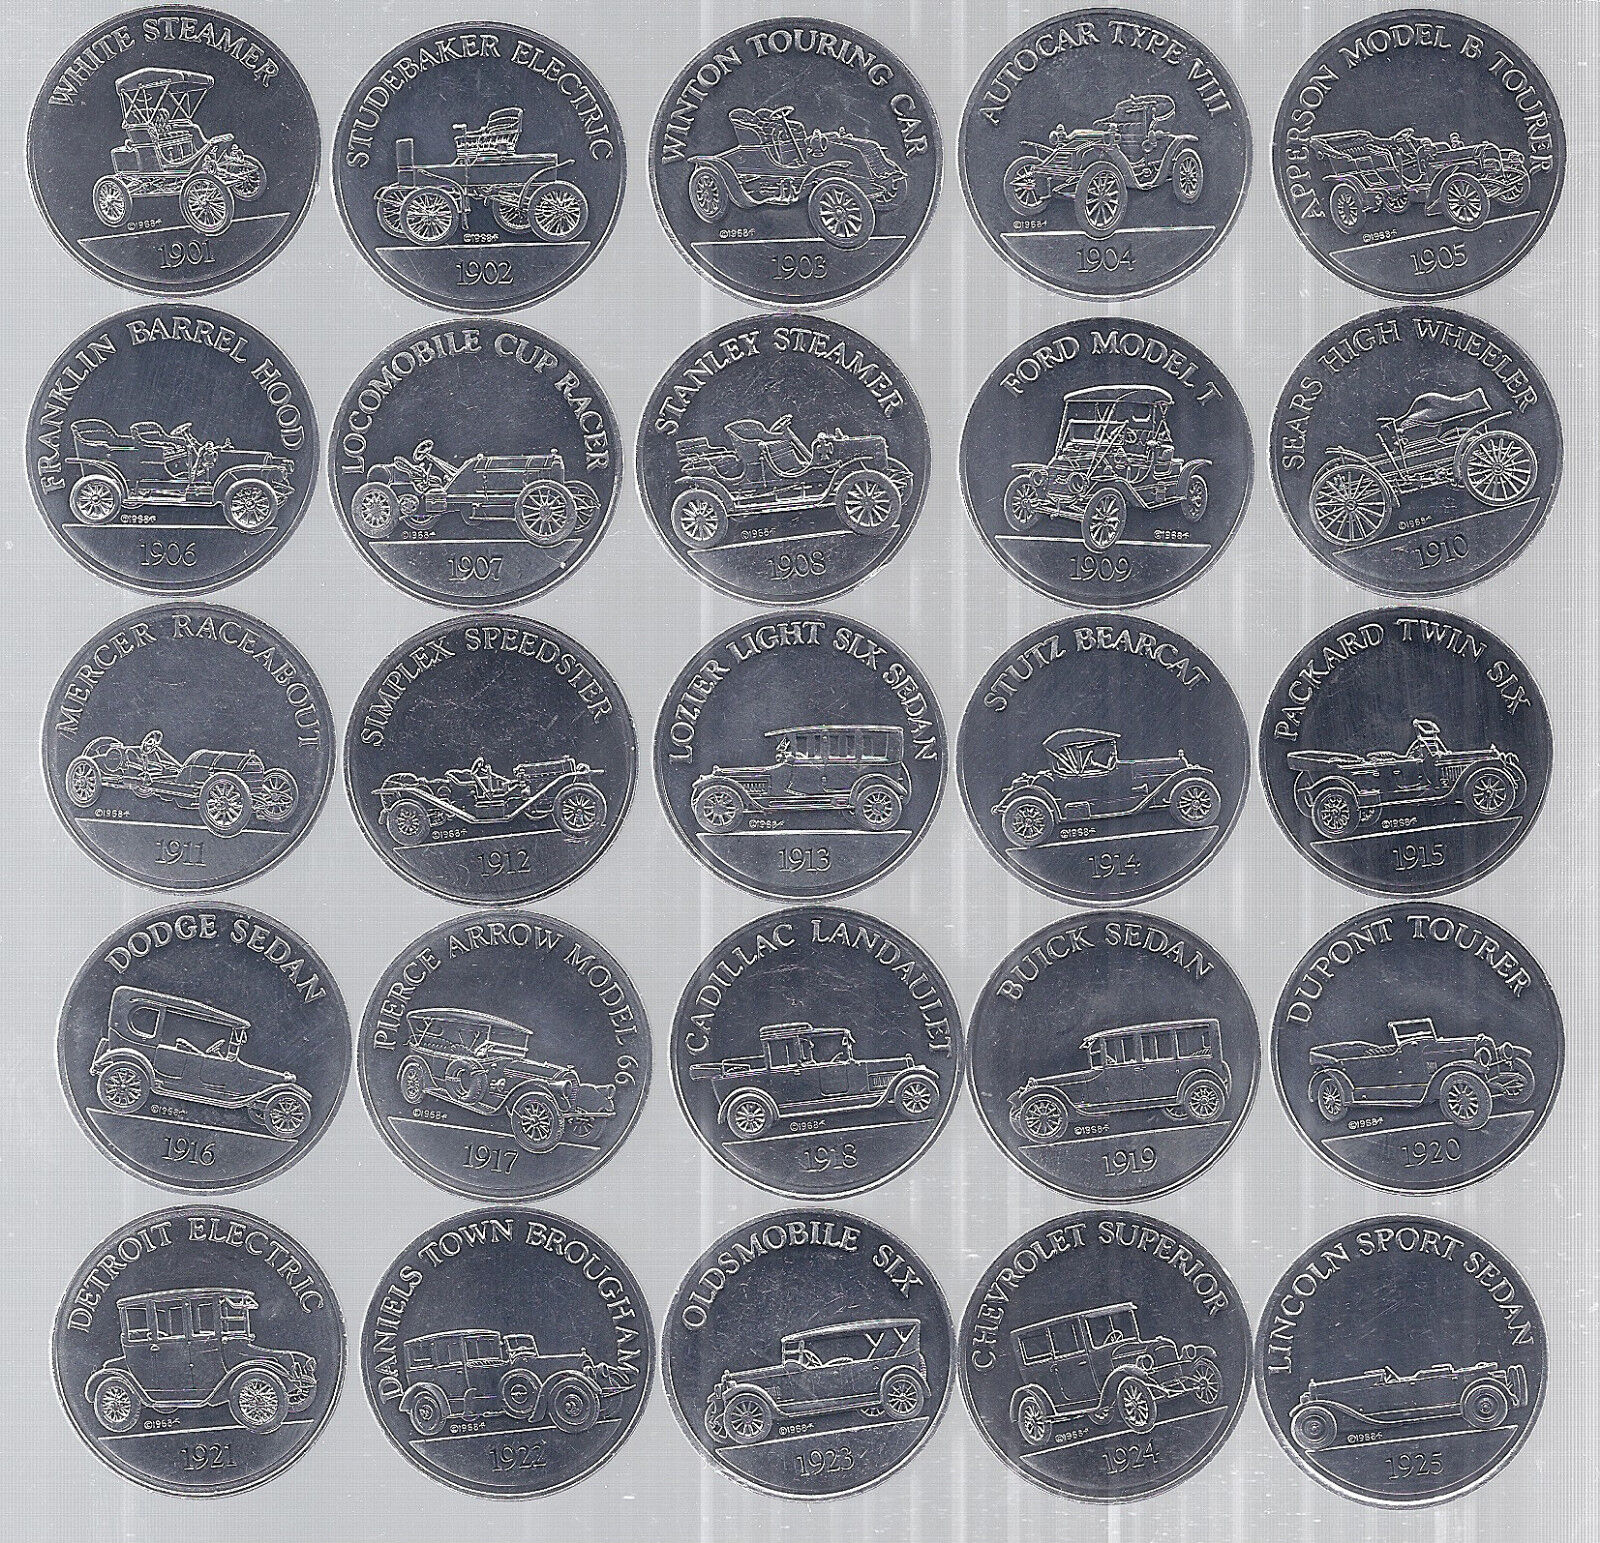 1968 Sunoco/DX Series 1 Antique Car Coin Collection, Lot of 25, 1901-1925*